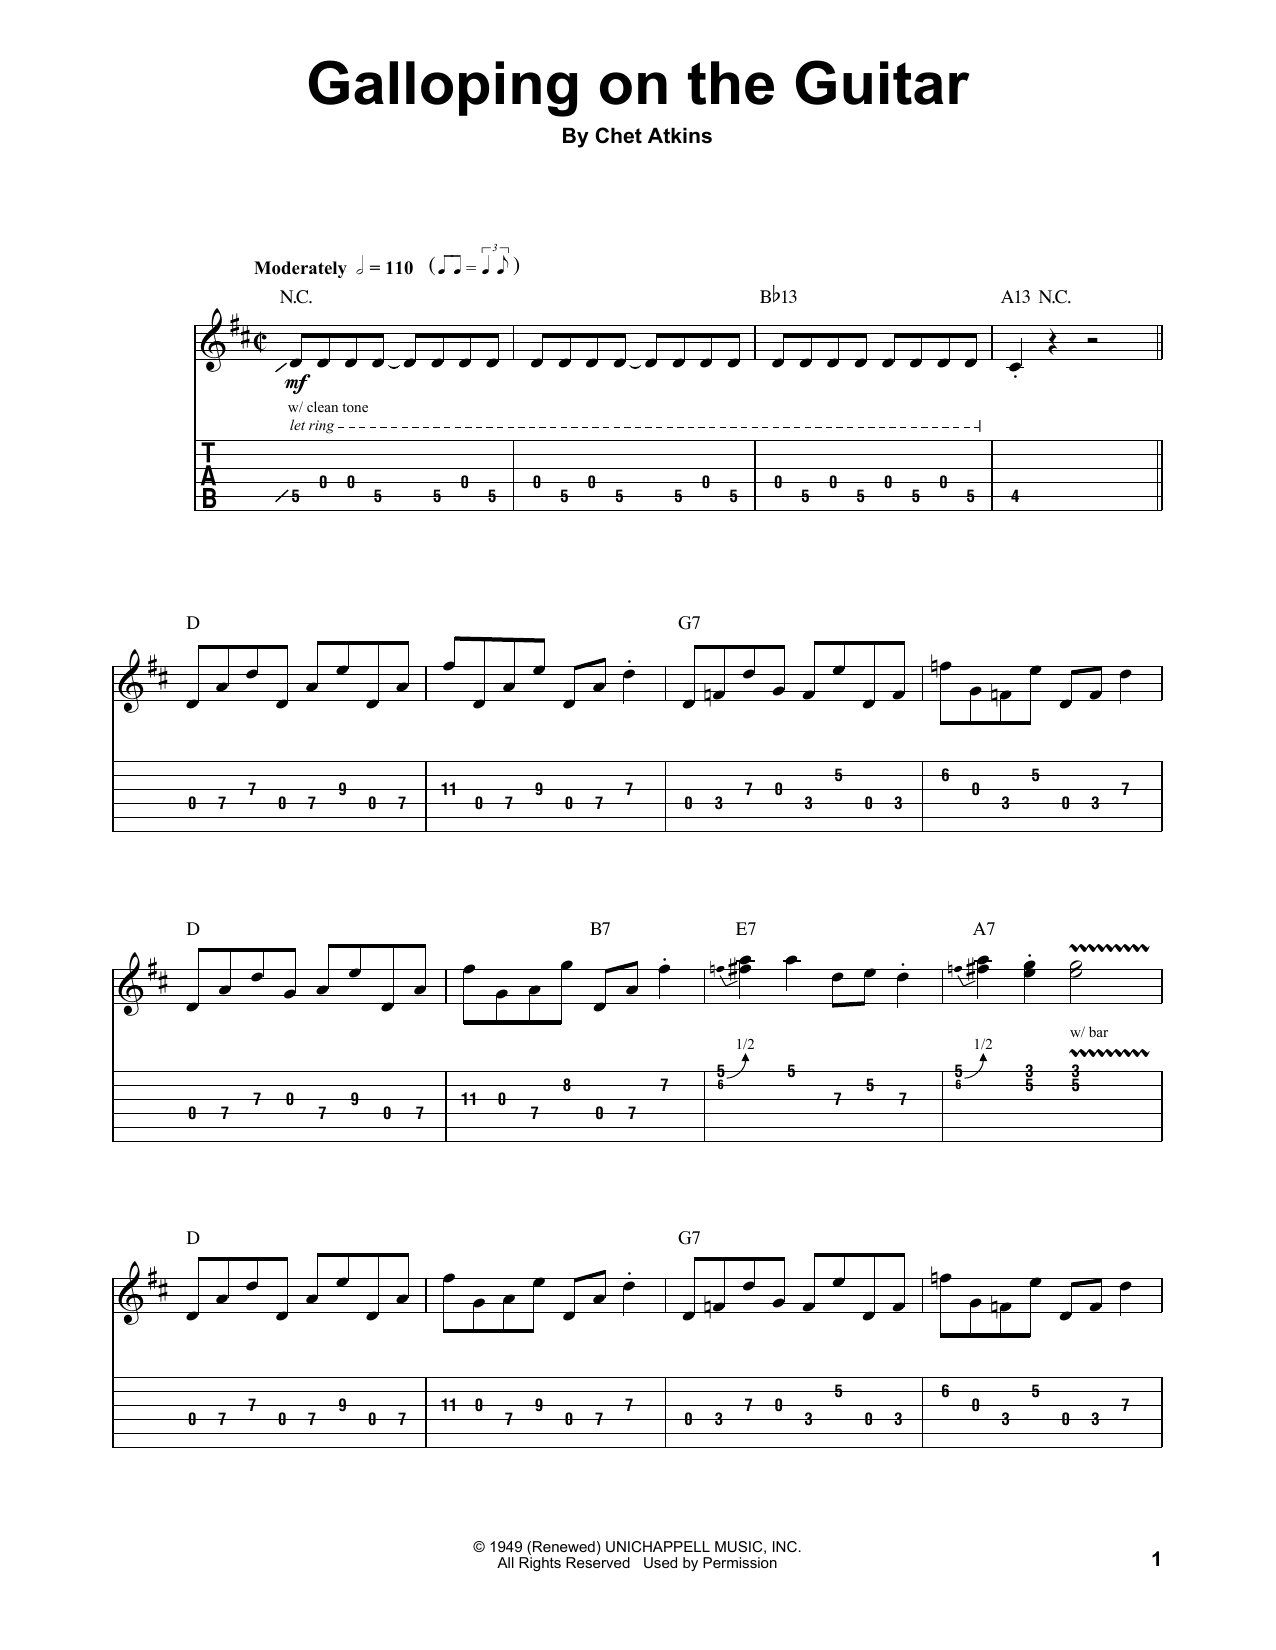 Download Chet Atkins Galloping On The Guitar Sheet Music